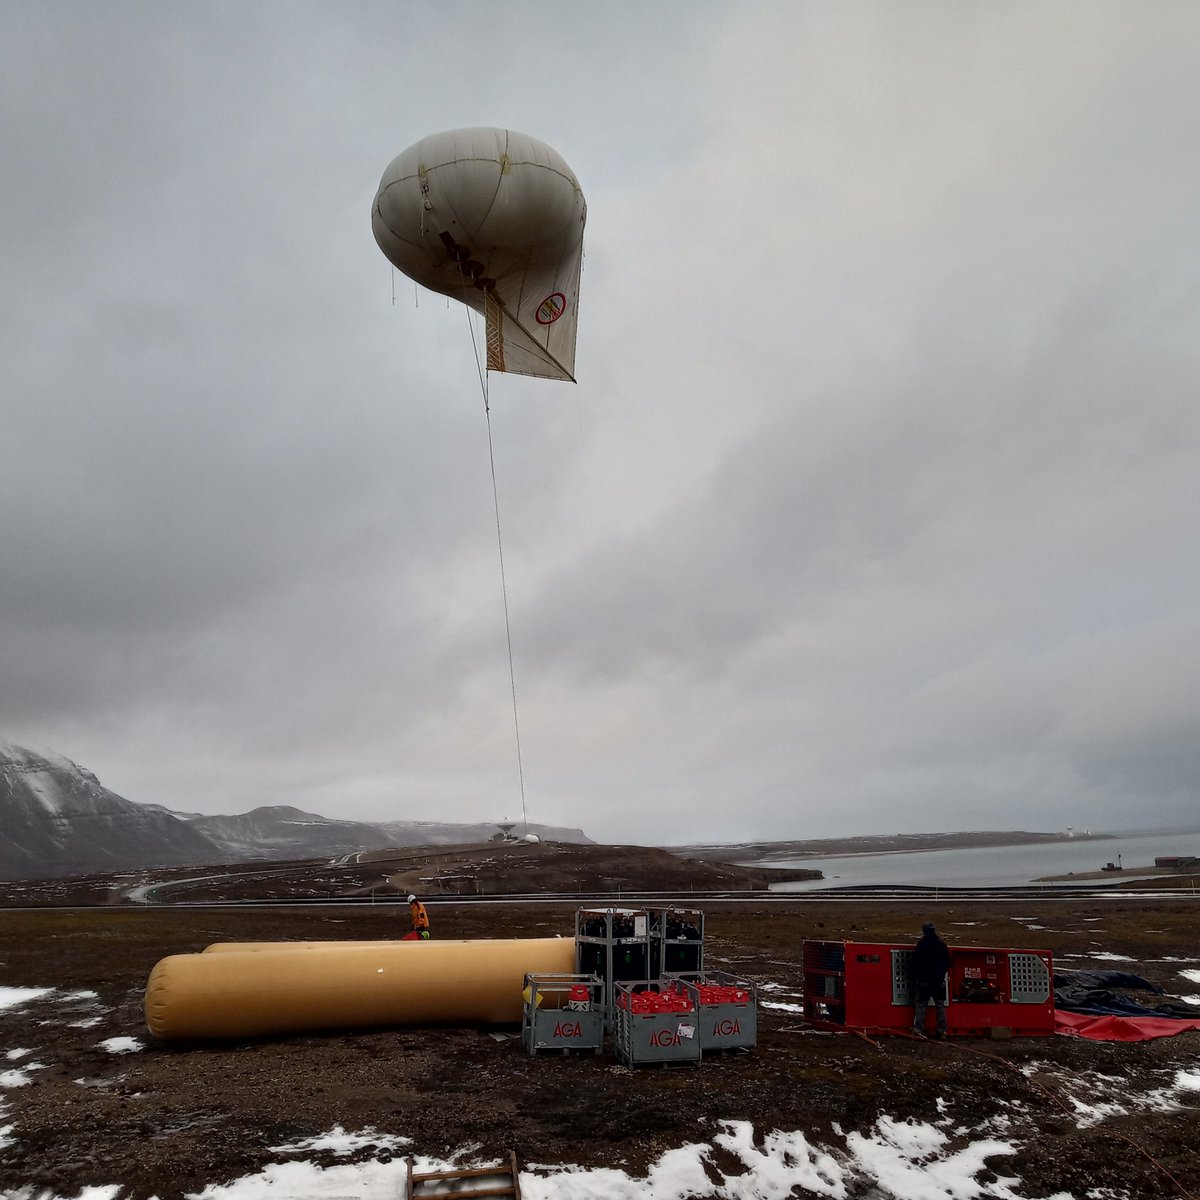 #HoloBalloon is flying in #NyAlesund😎. Just a short test flight, but higher flights will come soon. The clouds looks great for #AtmosphericSciences and #ArcticResearch
@NASCENT_Arctic @usys_ethzh @ETH 
Picture by Jörg Wieder